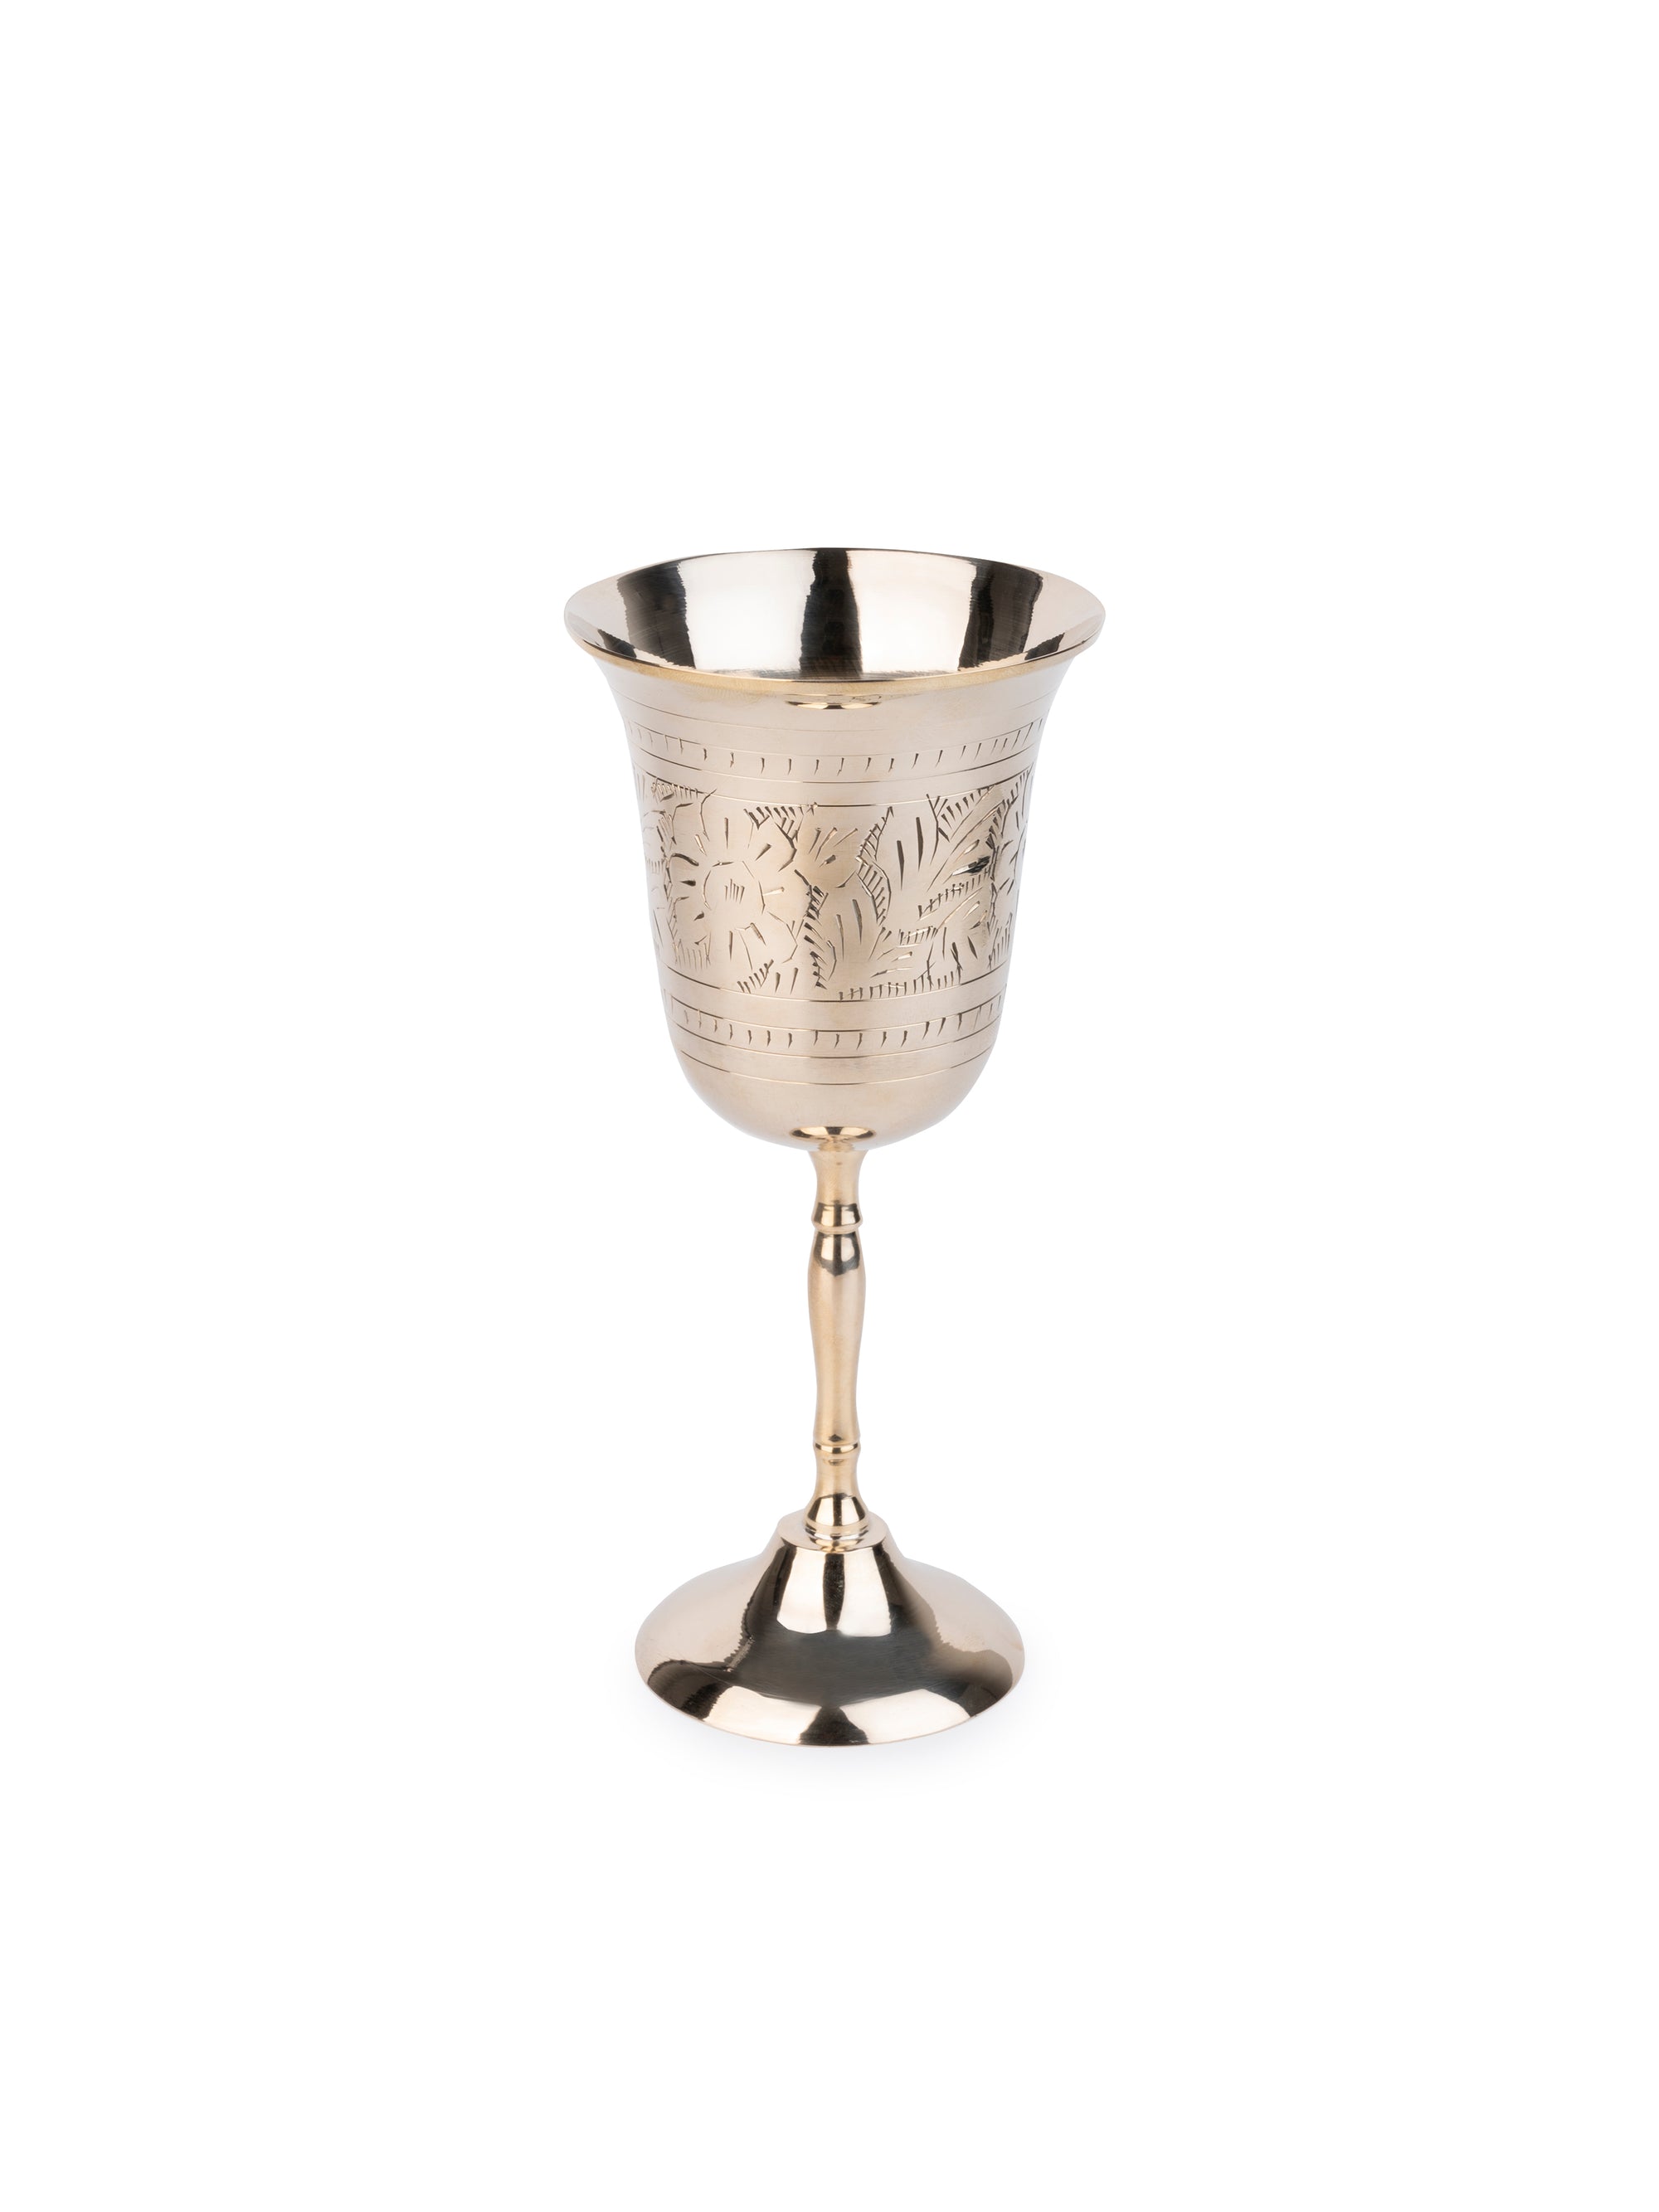 Elegant and Stylish Brass Crafted Cocktail / Wine / Beverage Glass